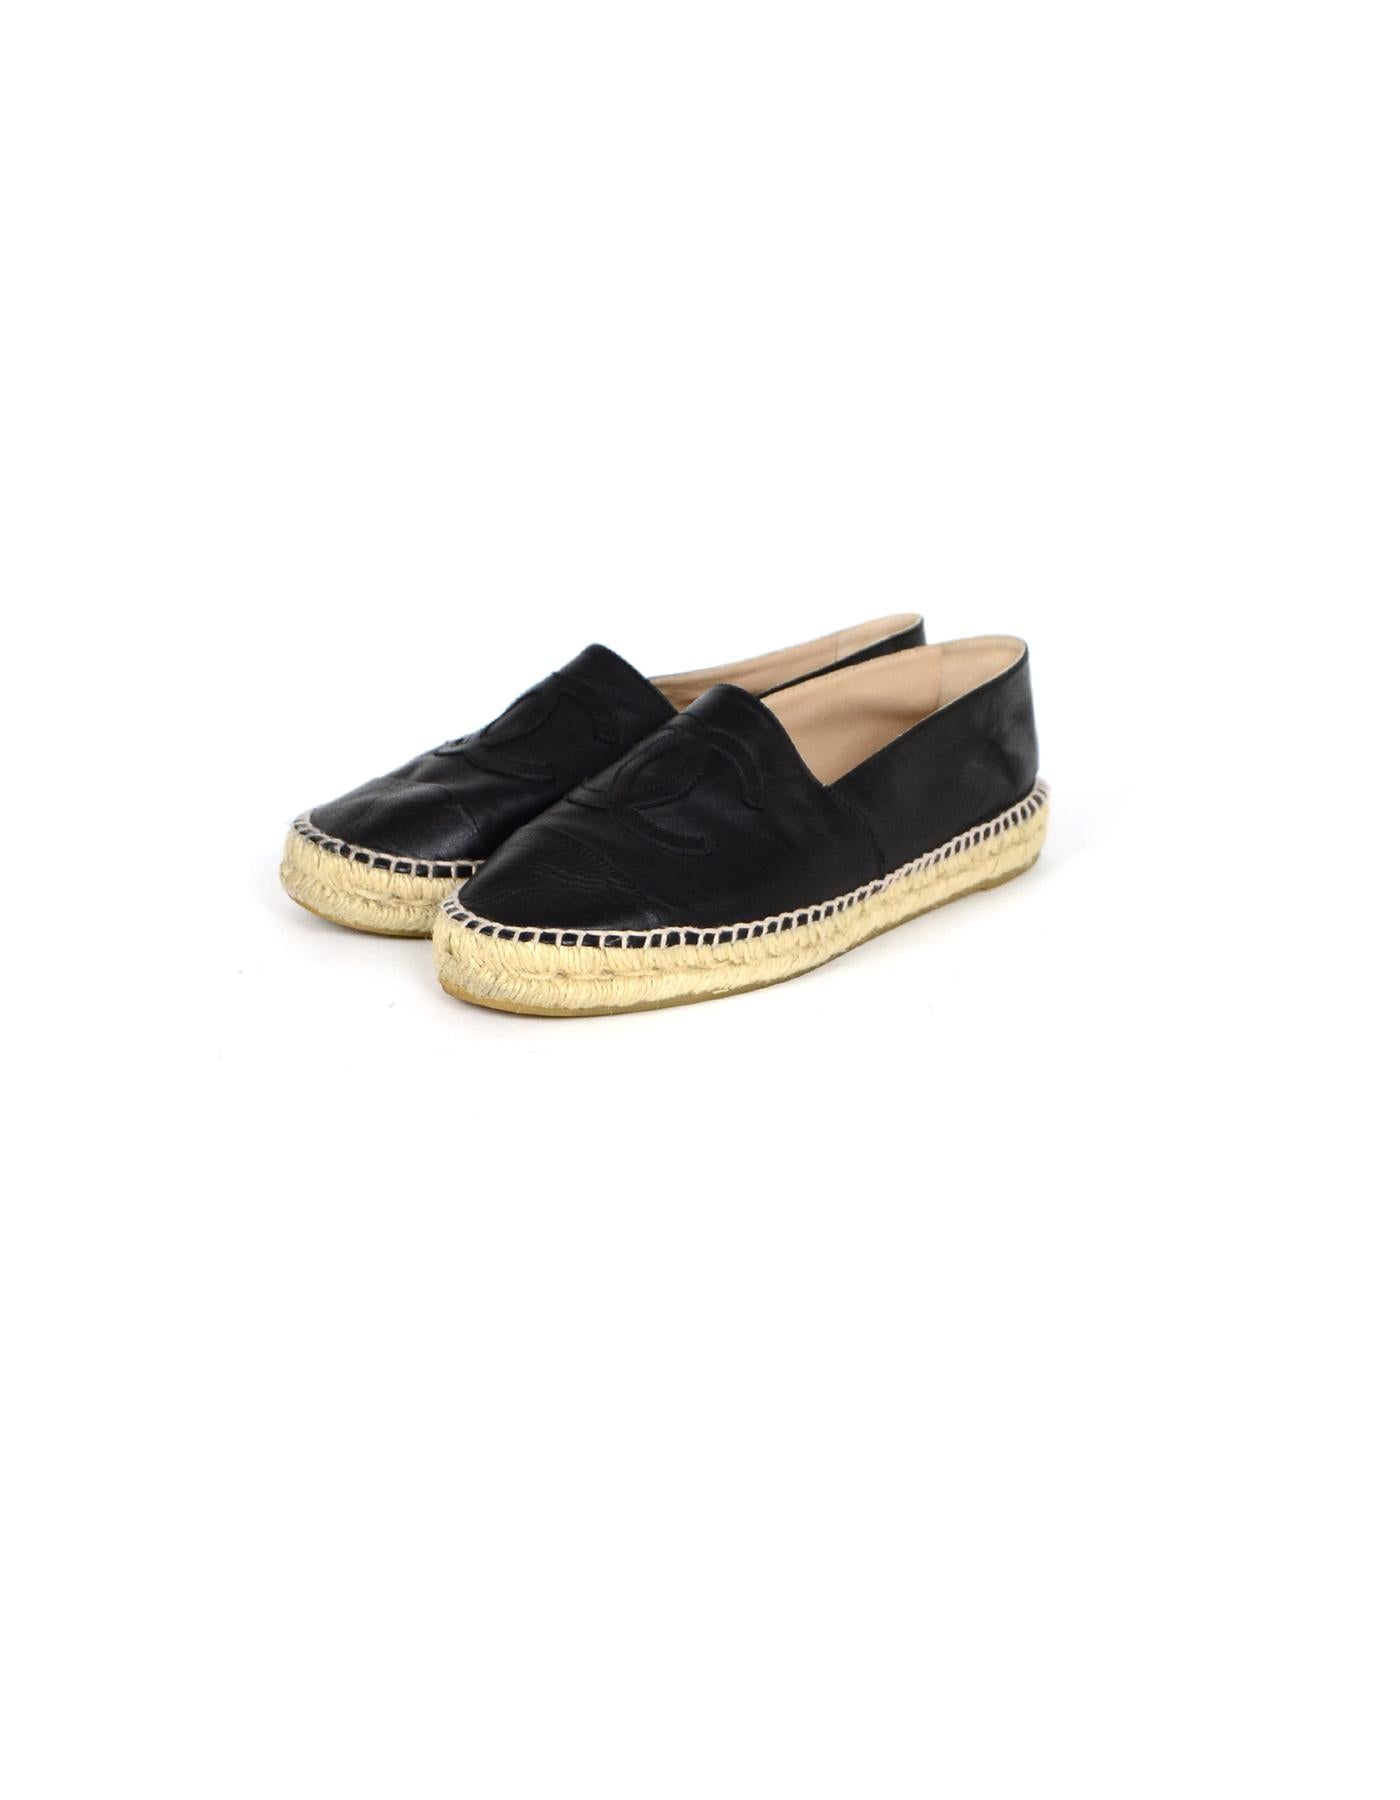 Chanel Black Leather CC Espadrilles sz 42

Made In: Spain 
Color: Black
Materials: Leather
Closure/Opening: Slip on
Overall Condition: Excellent pre-owned condition, with the exception of minor marks on the exterior (see photos), and minor wear on